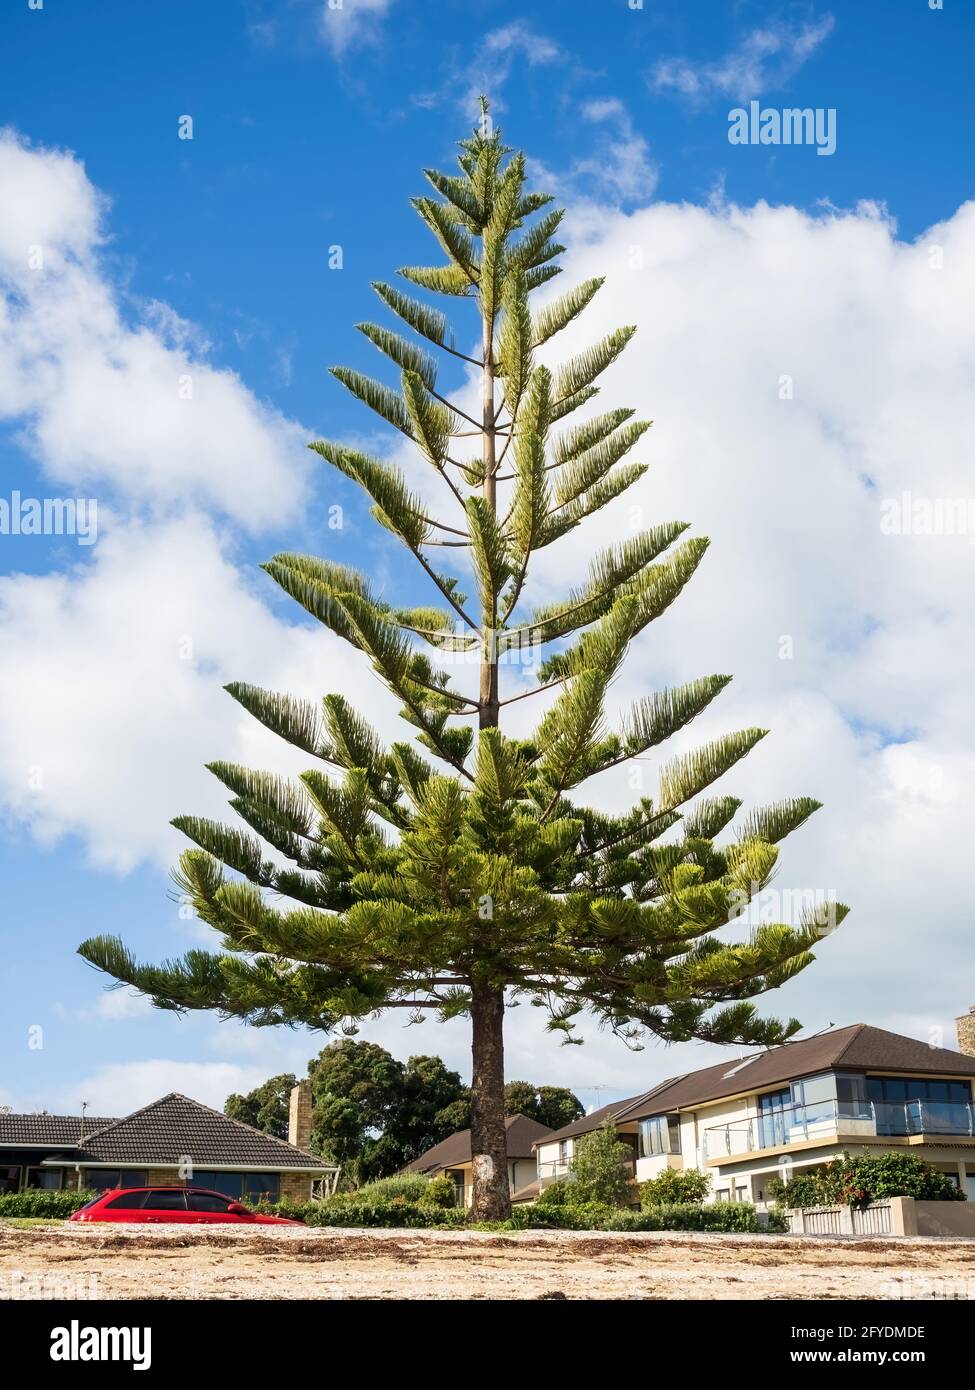 AUCKLAND, NEW ZEALAND - May 19, 2021: View of Norfolk Island pine at Bucklands Beach. Auckland, New Zealand - May 13, 2021 Stock Photo